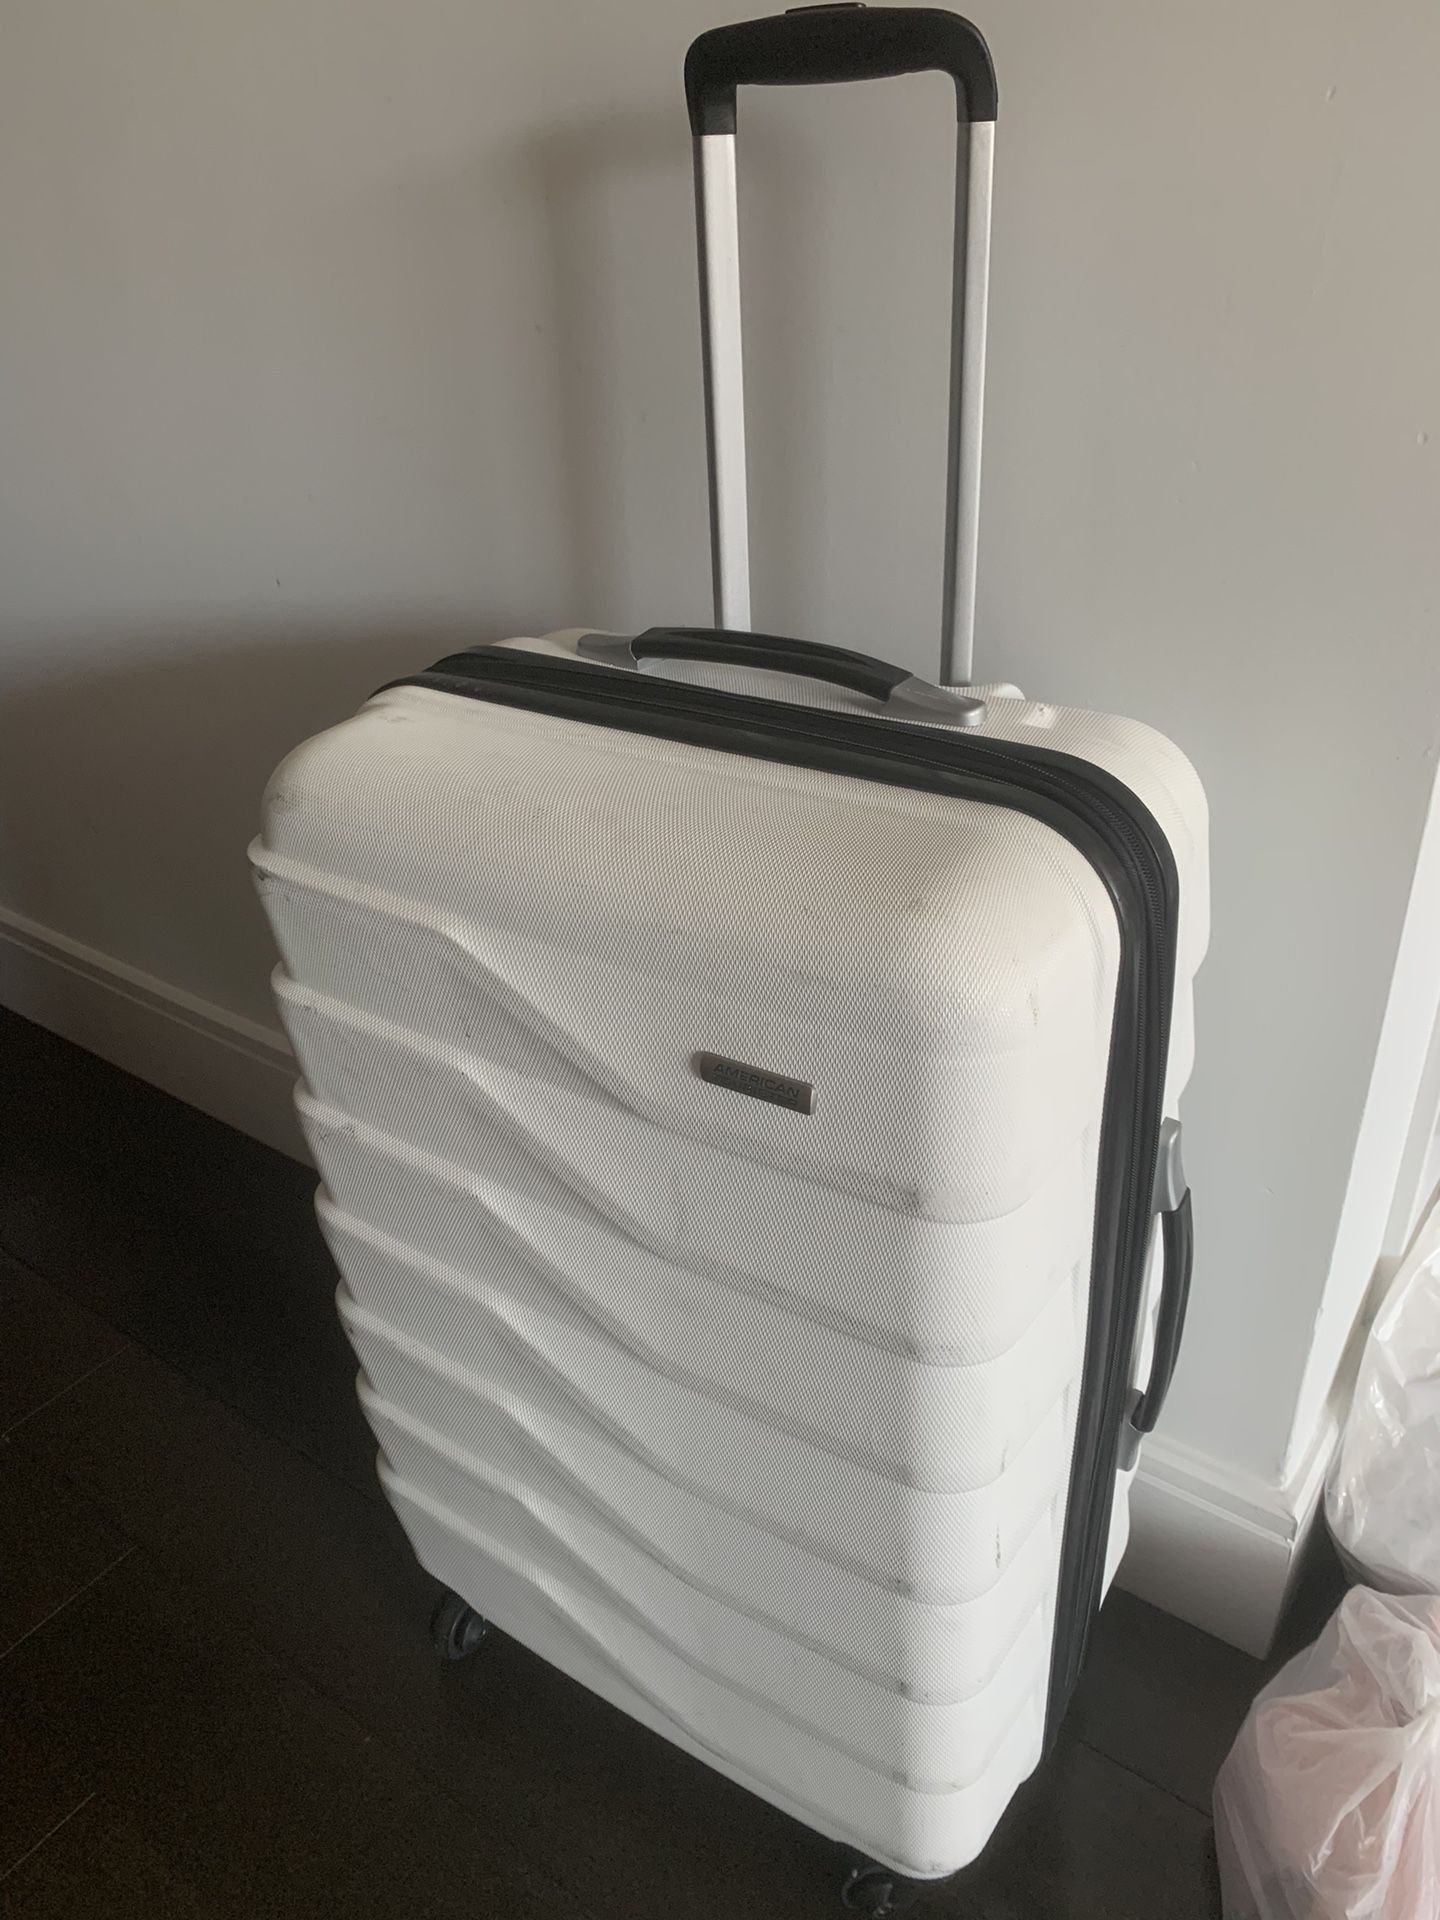 26” American Tourister Hard Shell Luggage, White